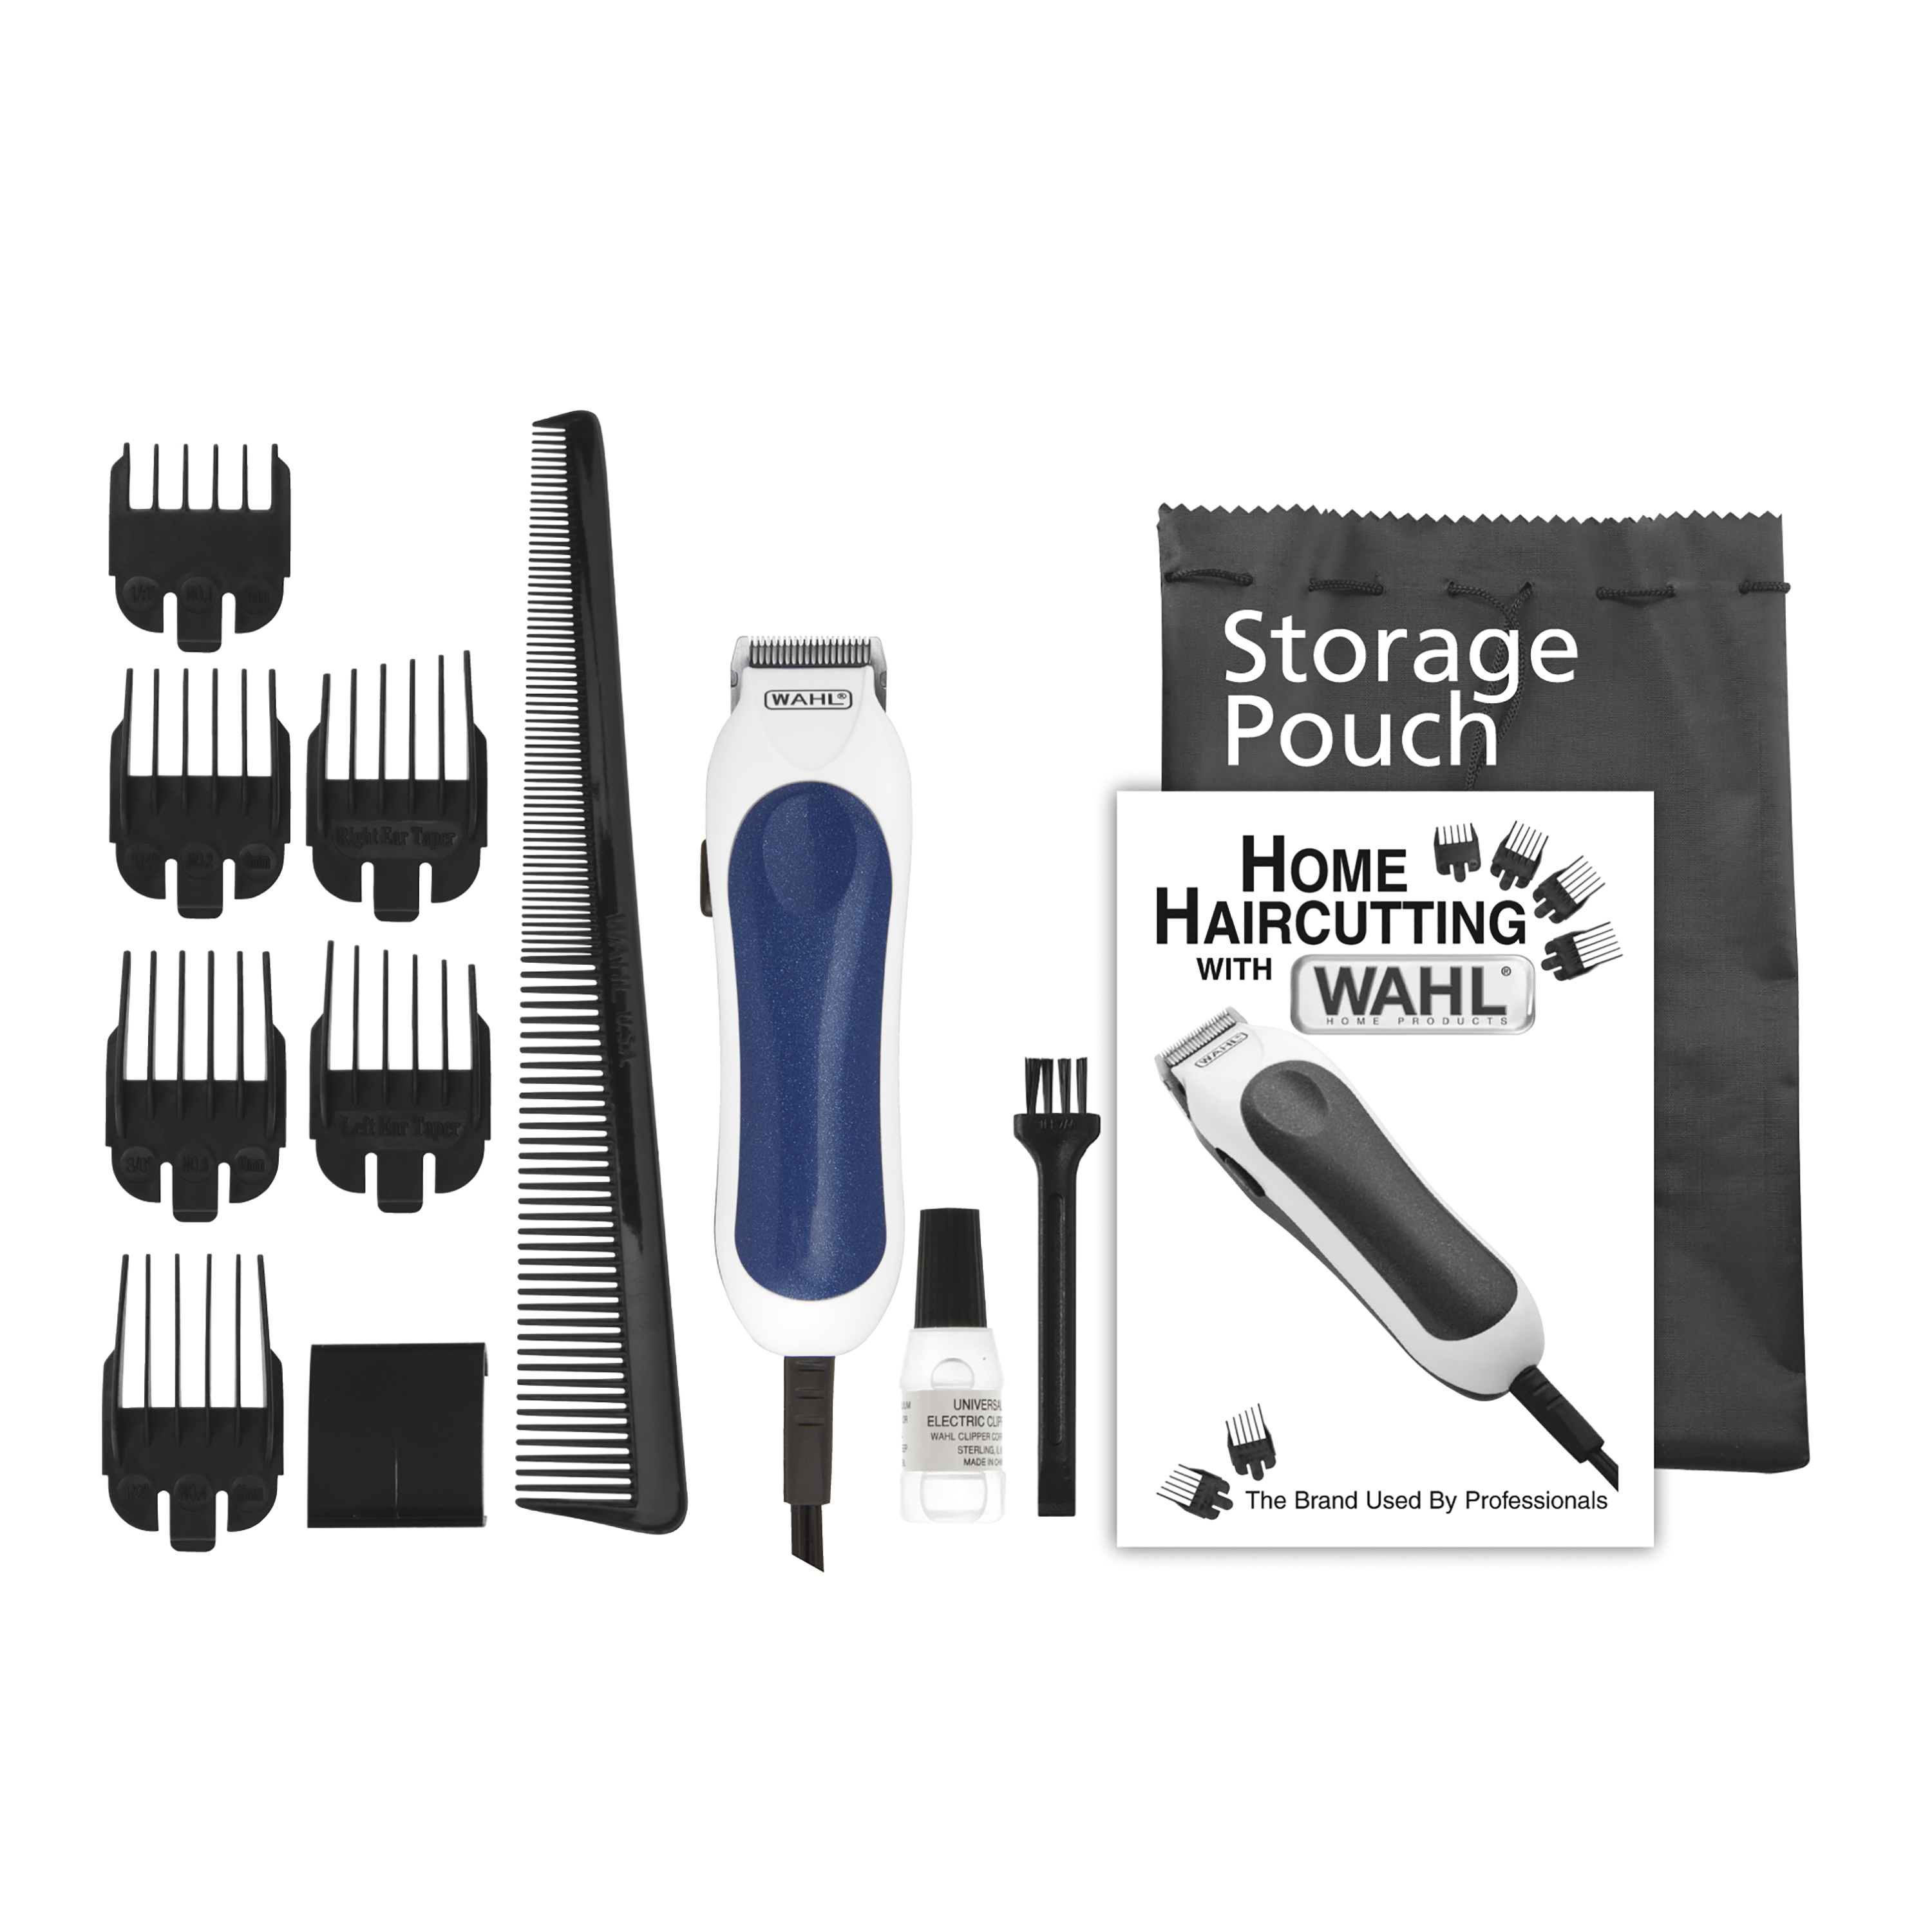 Wahl Mini Pro Touch Up Corded Trimmer Kit, Men or Women, 12pc, Blue - 9307 - image 1 of 3